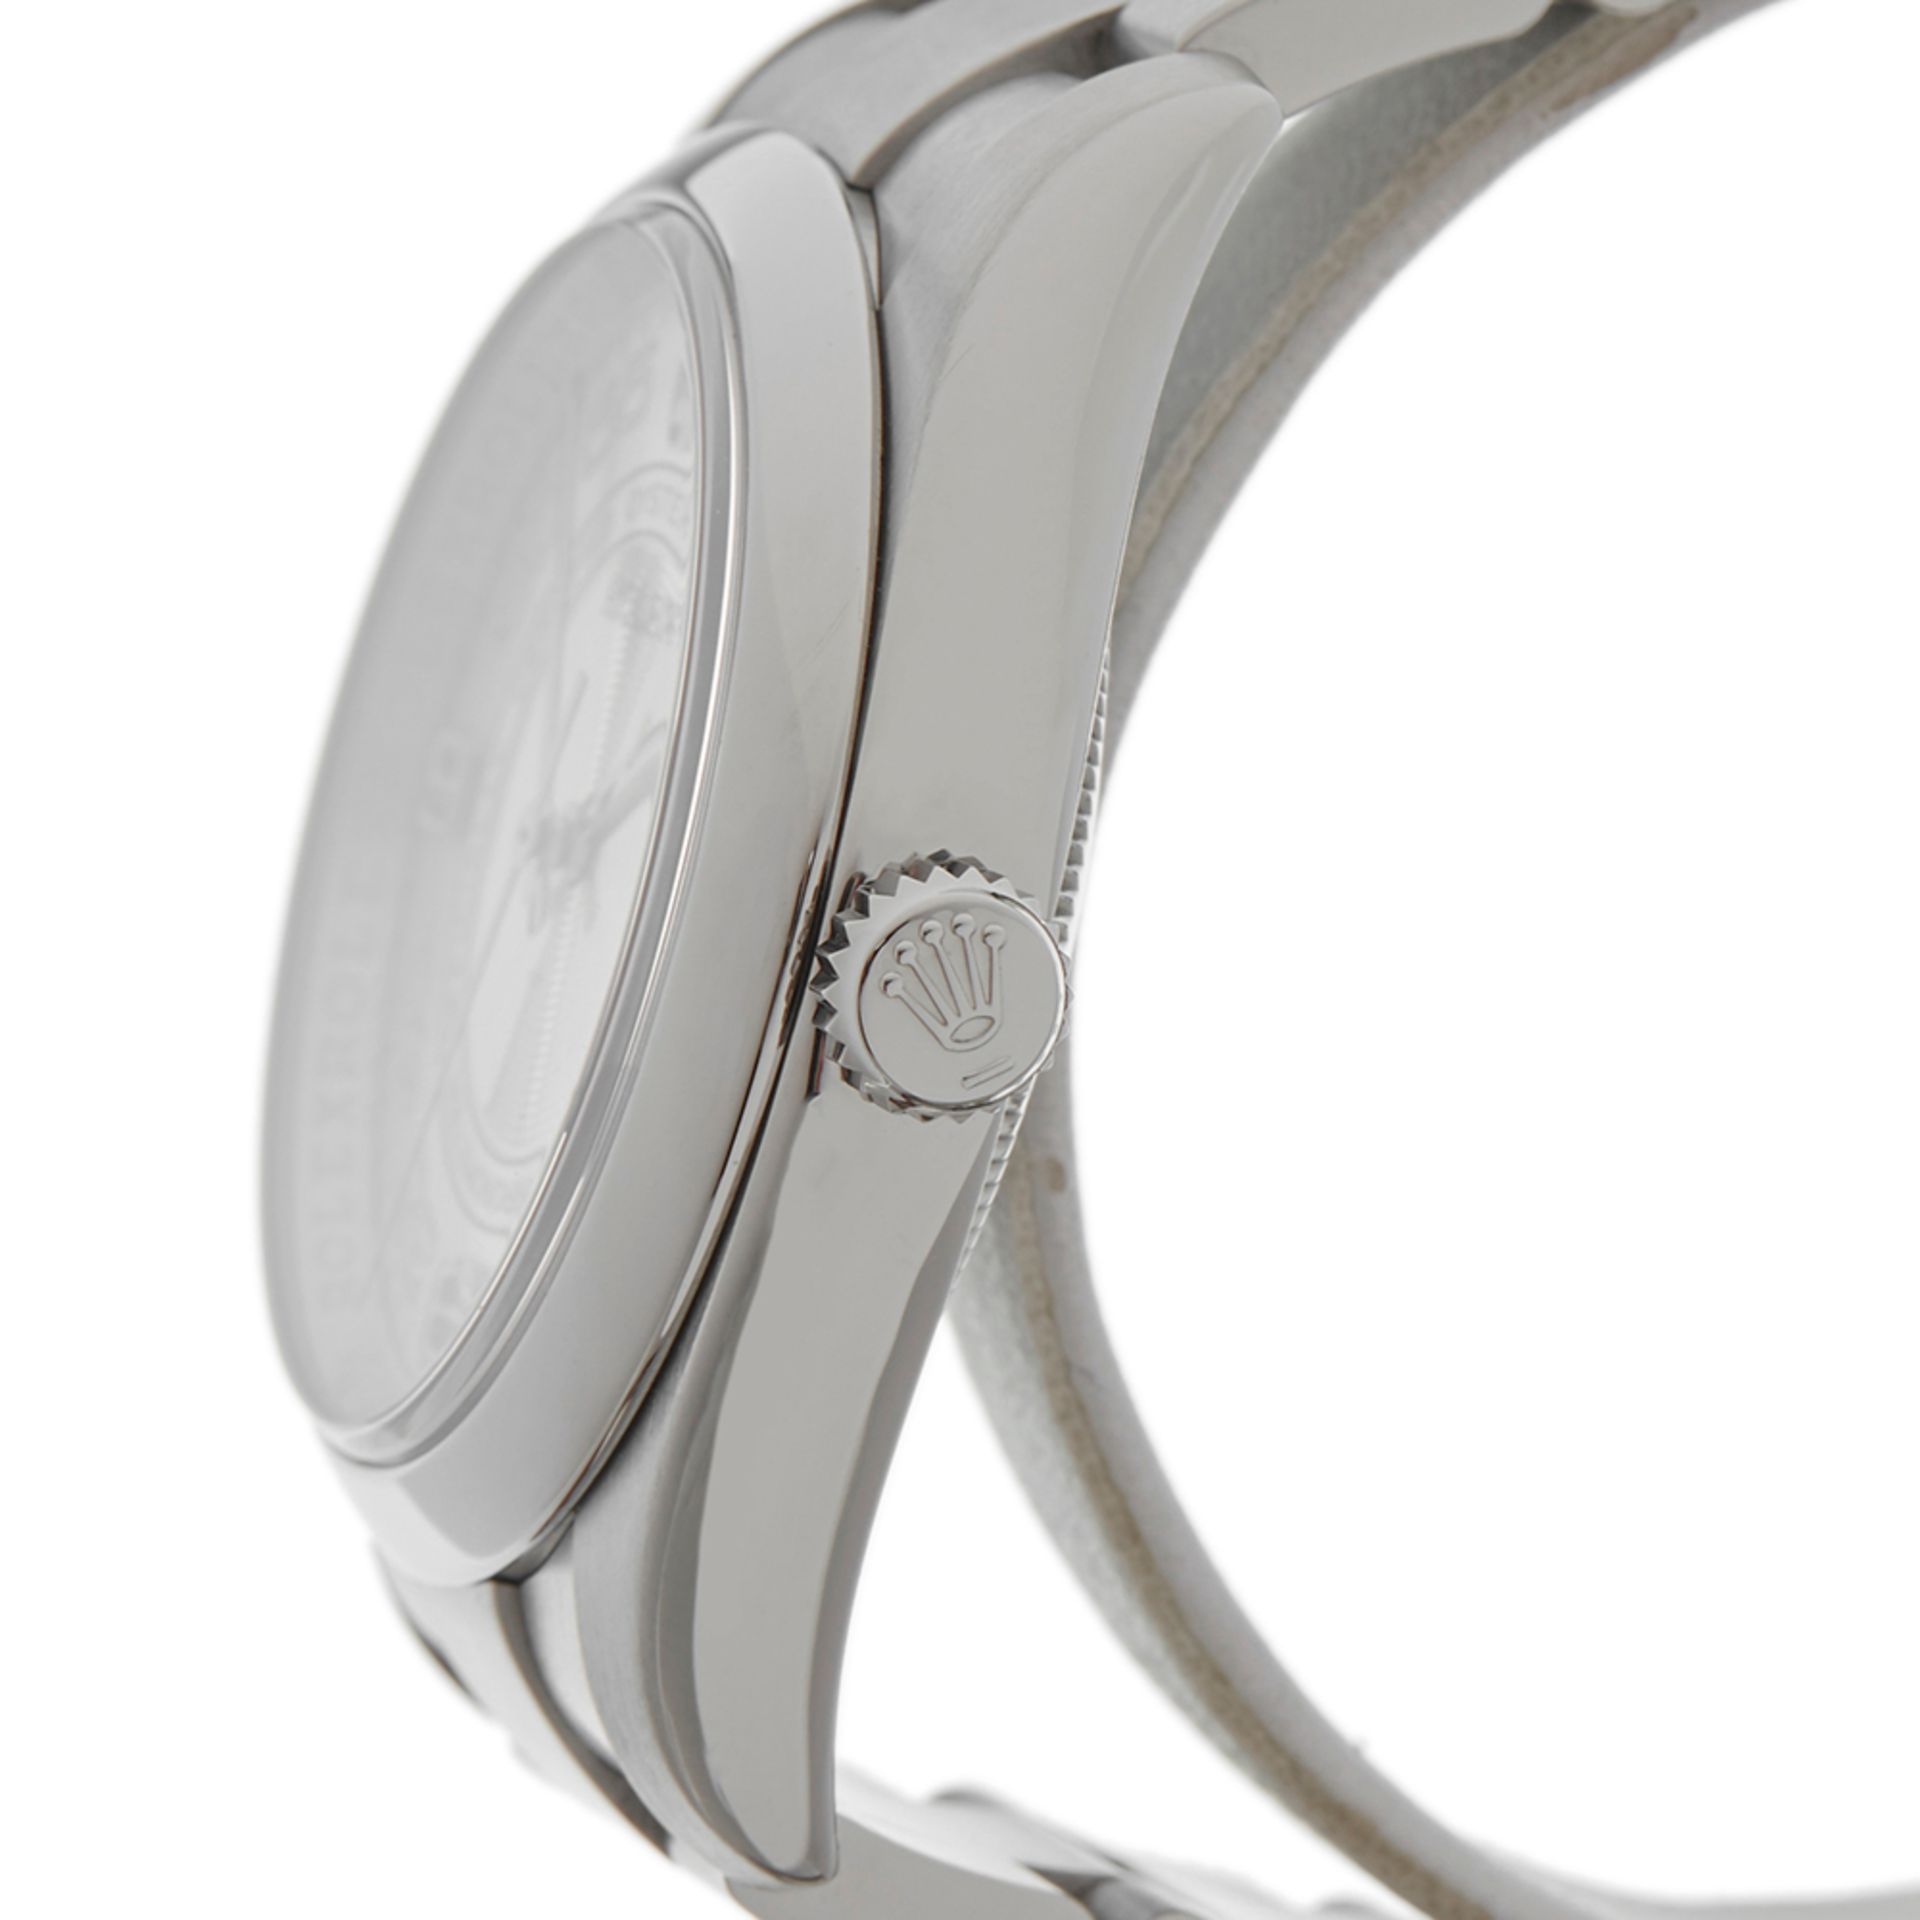 Oyster Perpetual 36mm Stainless Steel 116000 - Image 4 of 9